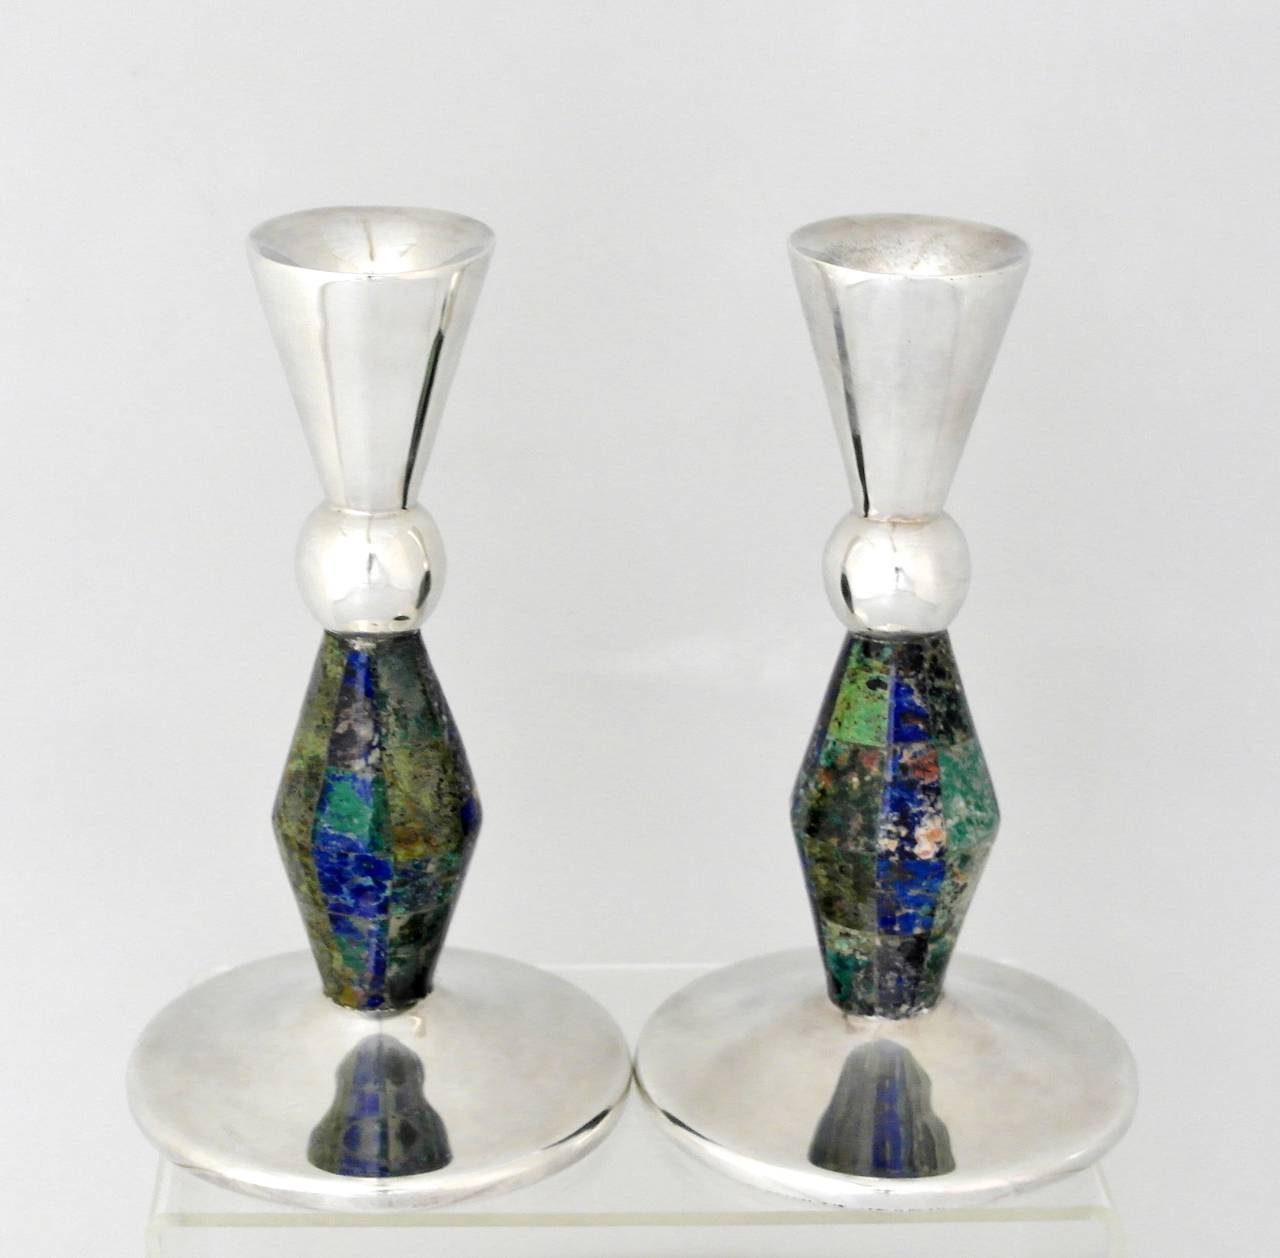 Being offered are a pair of candlesticks by Los Castillo of Taxco, Mexico. Handwrought pair with azur malachite & lapis lazuli stone inlay at the stems. Dimensions: 7 inches x 4 inches diameter at the base. Marked as illustrated. In excellent